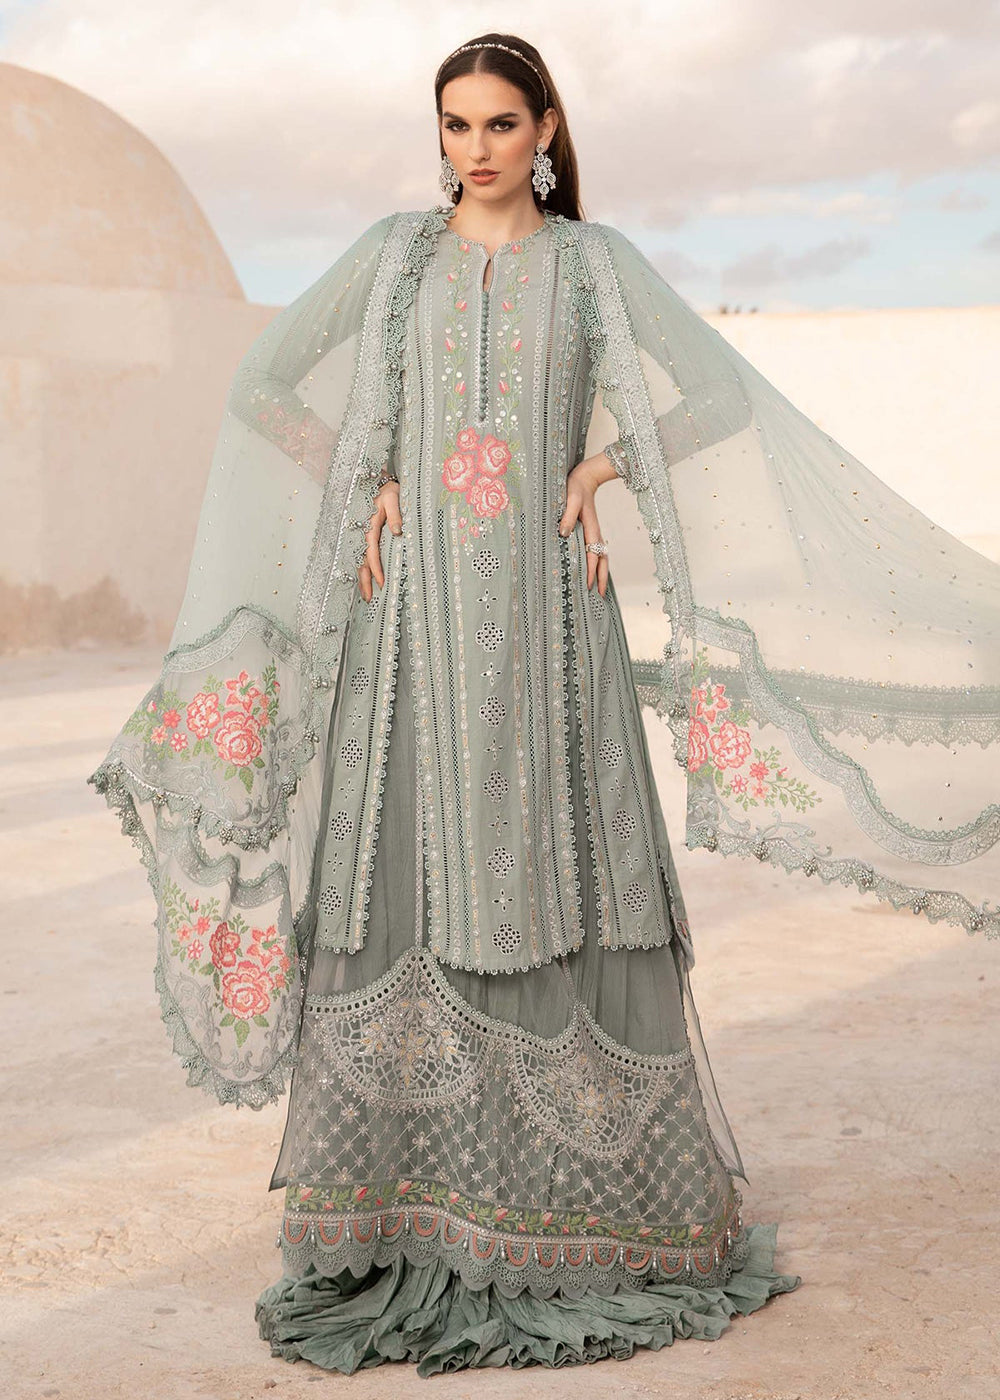 Buy Now Unstitched Voyage a' Luxe Lawn '24 by Maria B | D-2412-B Online at Empress in USA, UK, Canada & Worldwide at Empress Clothing. 